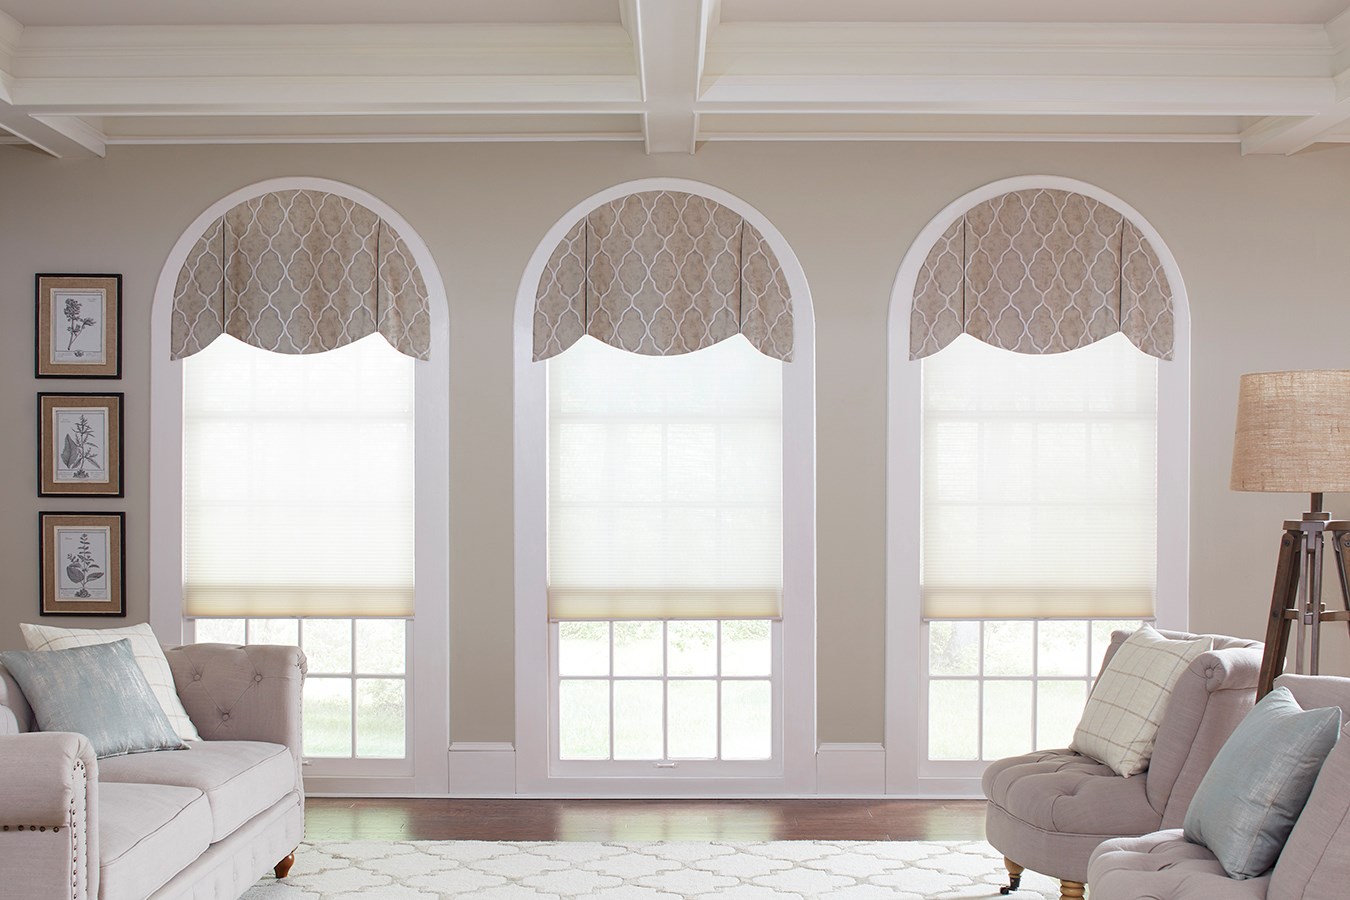 Three large windows with patterned half-circle valances and sheer roller shades, offering an elegant window treatment in a stylish living room with neutral-toned furniture and framed artwork.